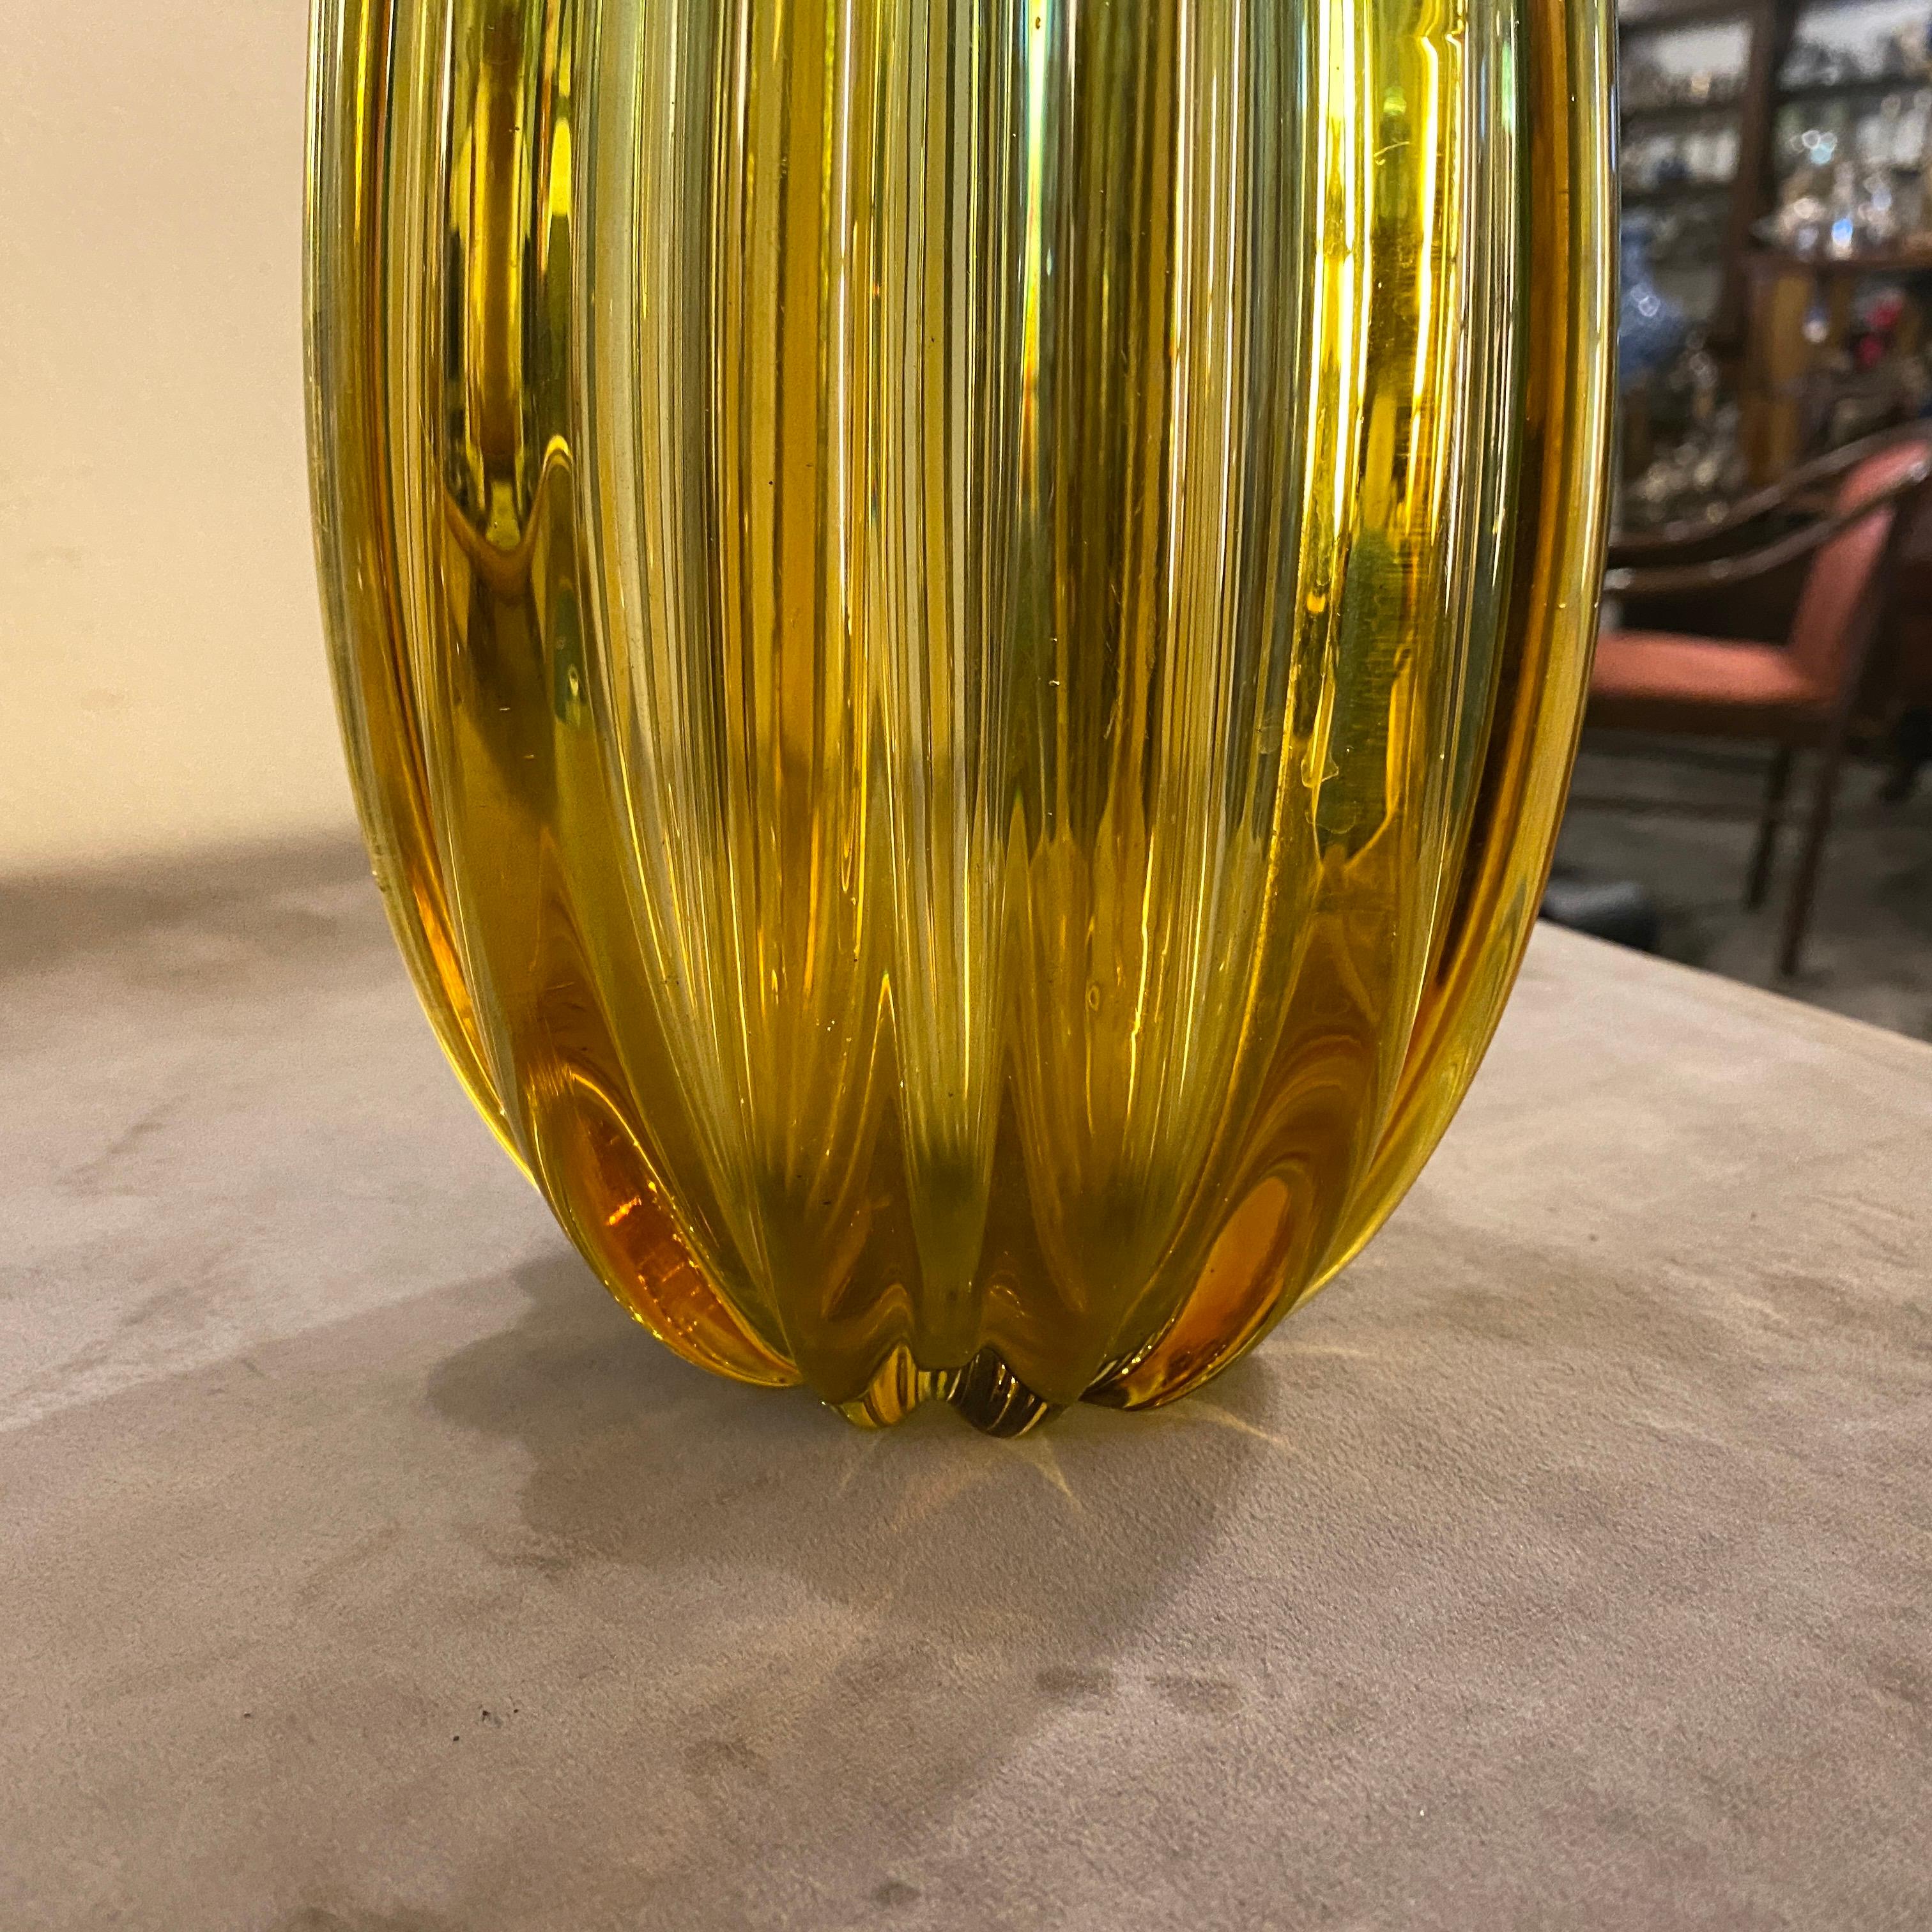 An oval murano glass made by Seguso, it's in perfect conditions, the particular technique of this hand-crafted vase has been called Sommerso Murano glass.